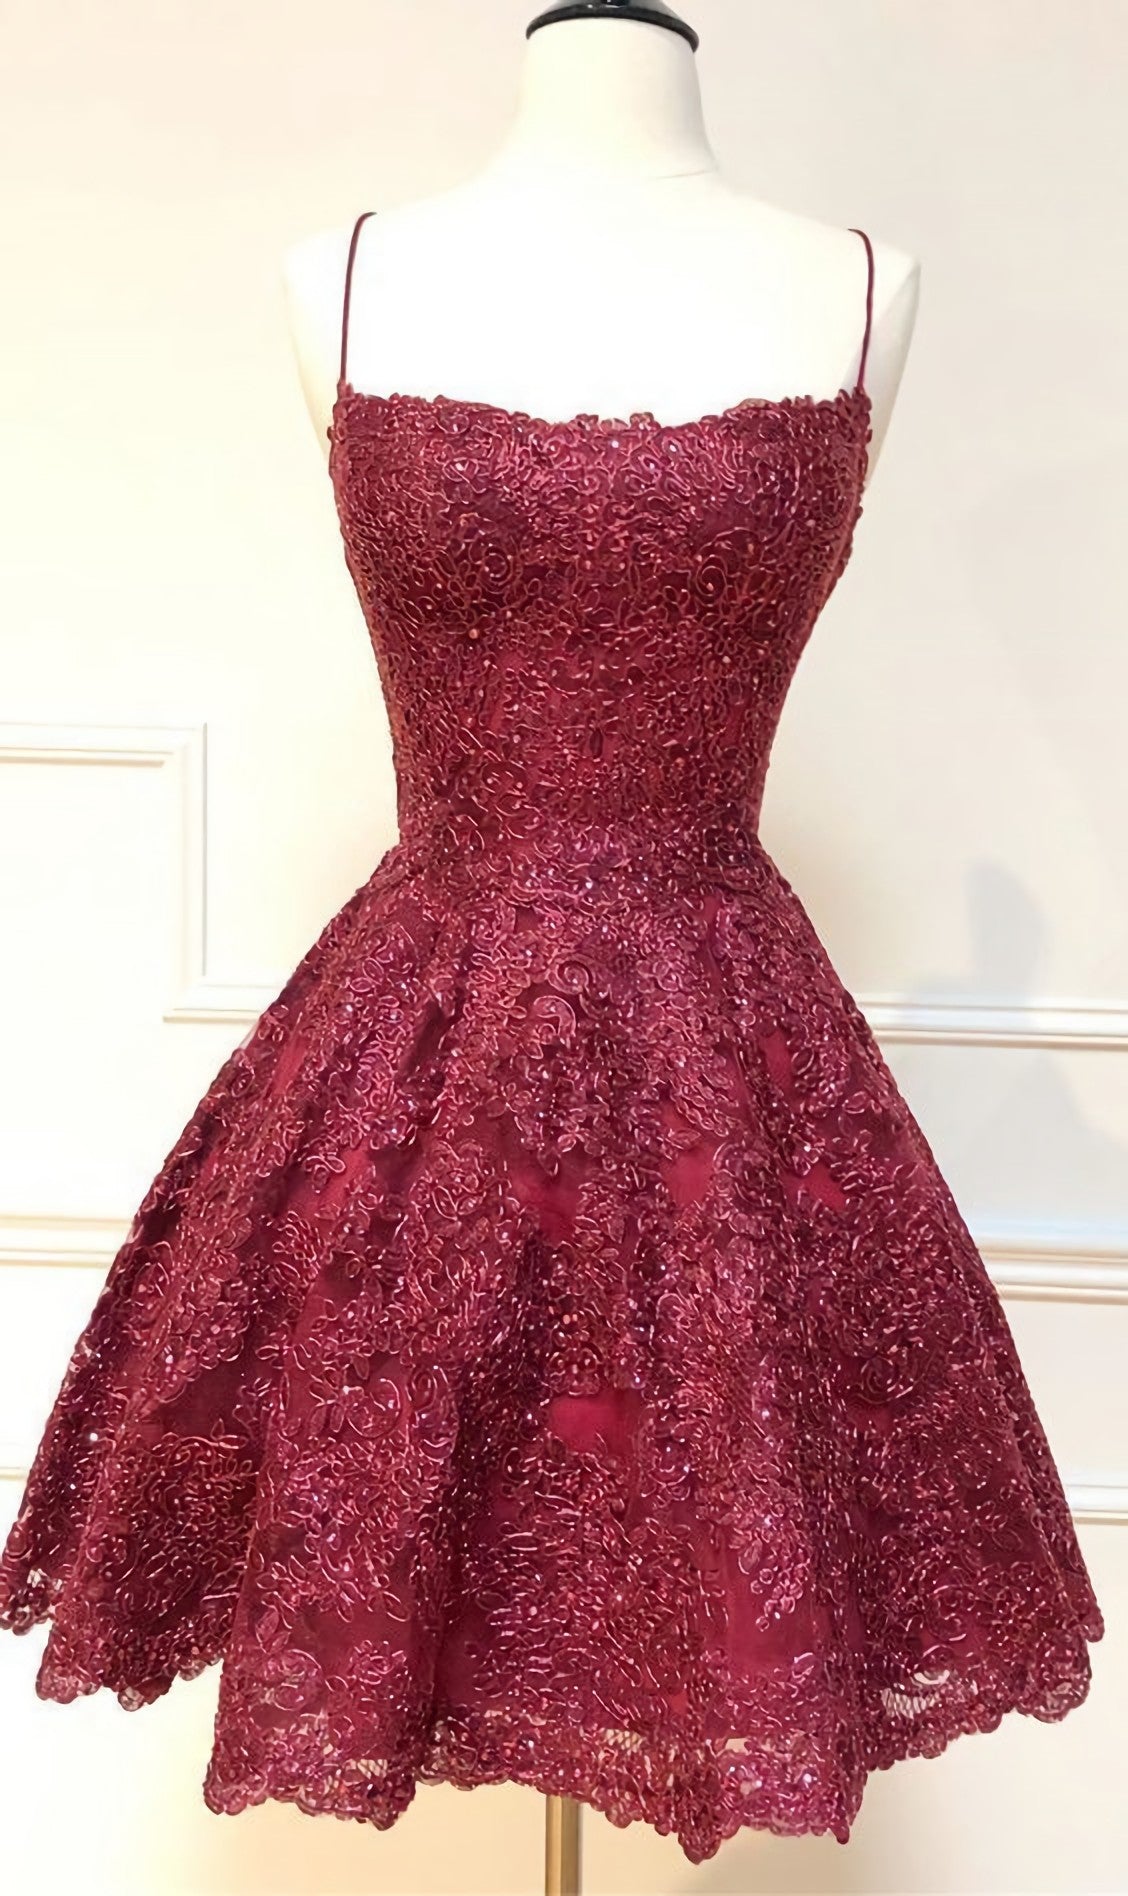 Formal Short Homecoming Dresses, Spaghetti Straps Cocktail Party Dresses, Burgundy Lace Homecoming Dresses, 2476